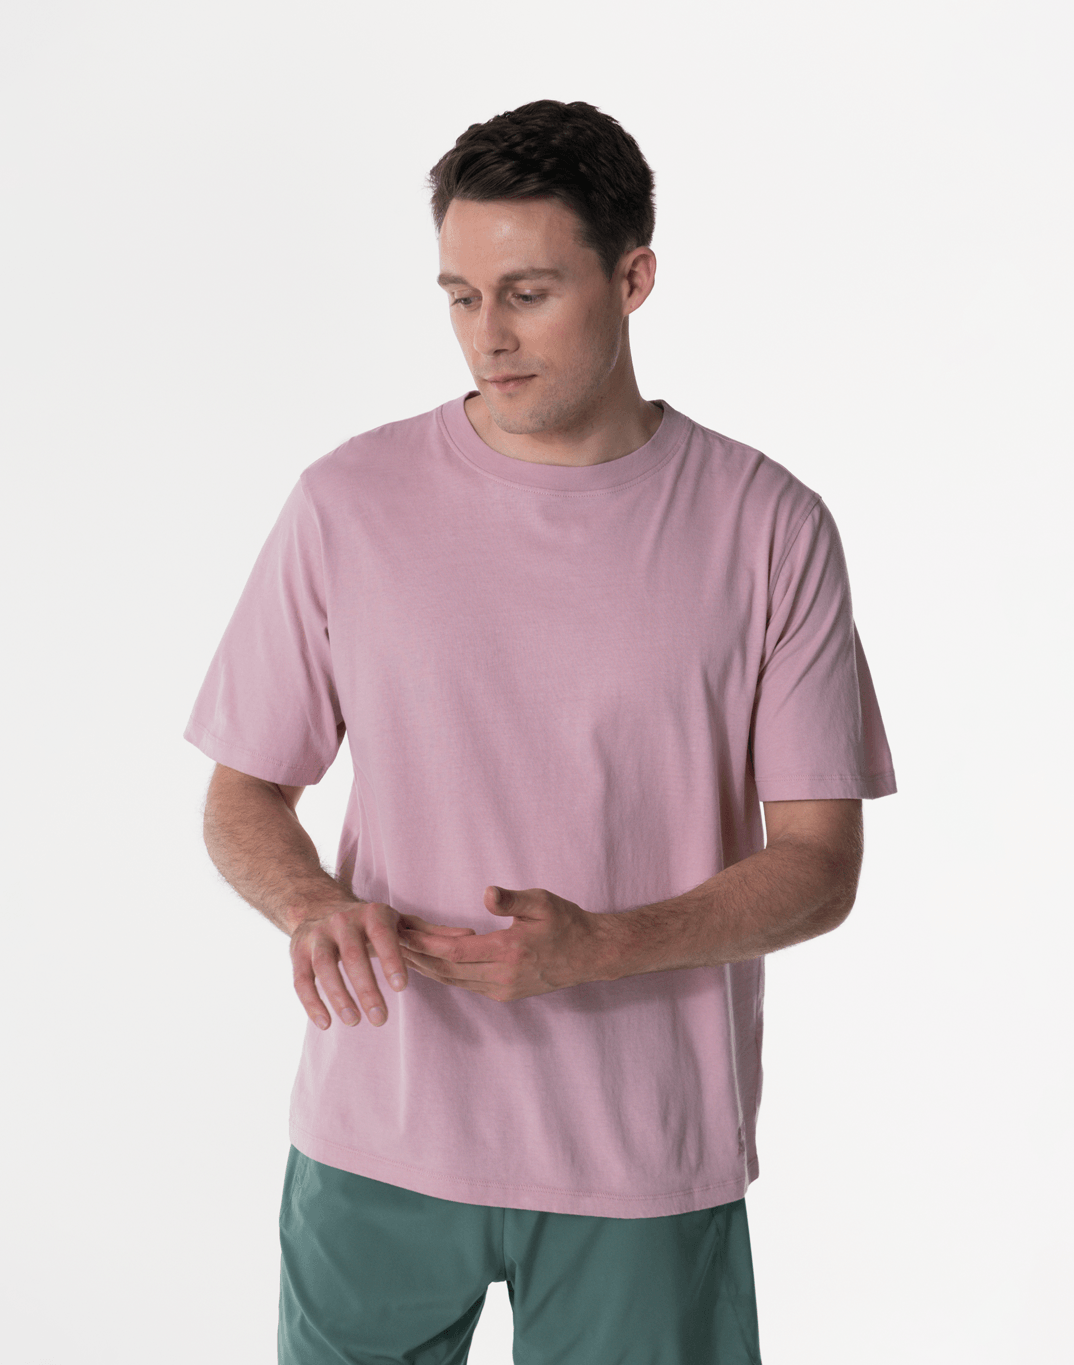 Kinney Tee in Pale Pink - T-Shirts - Gym+Coffee